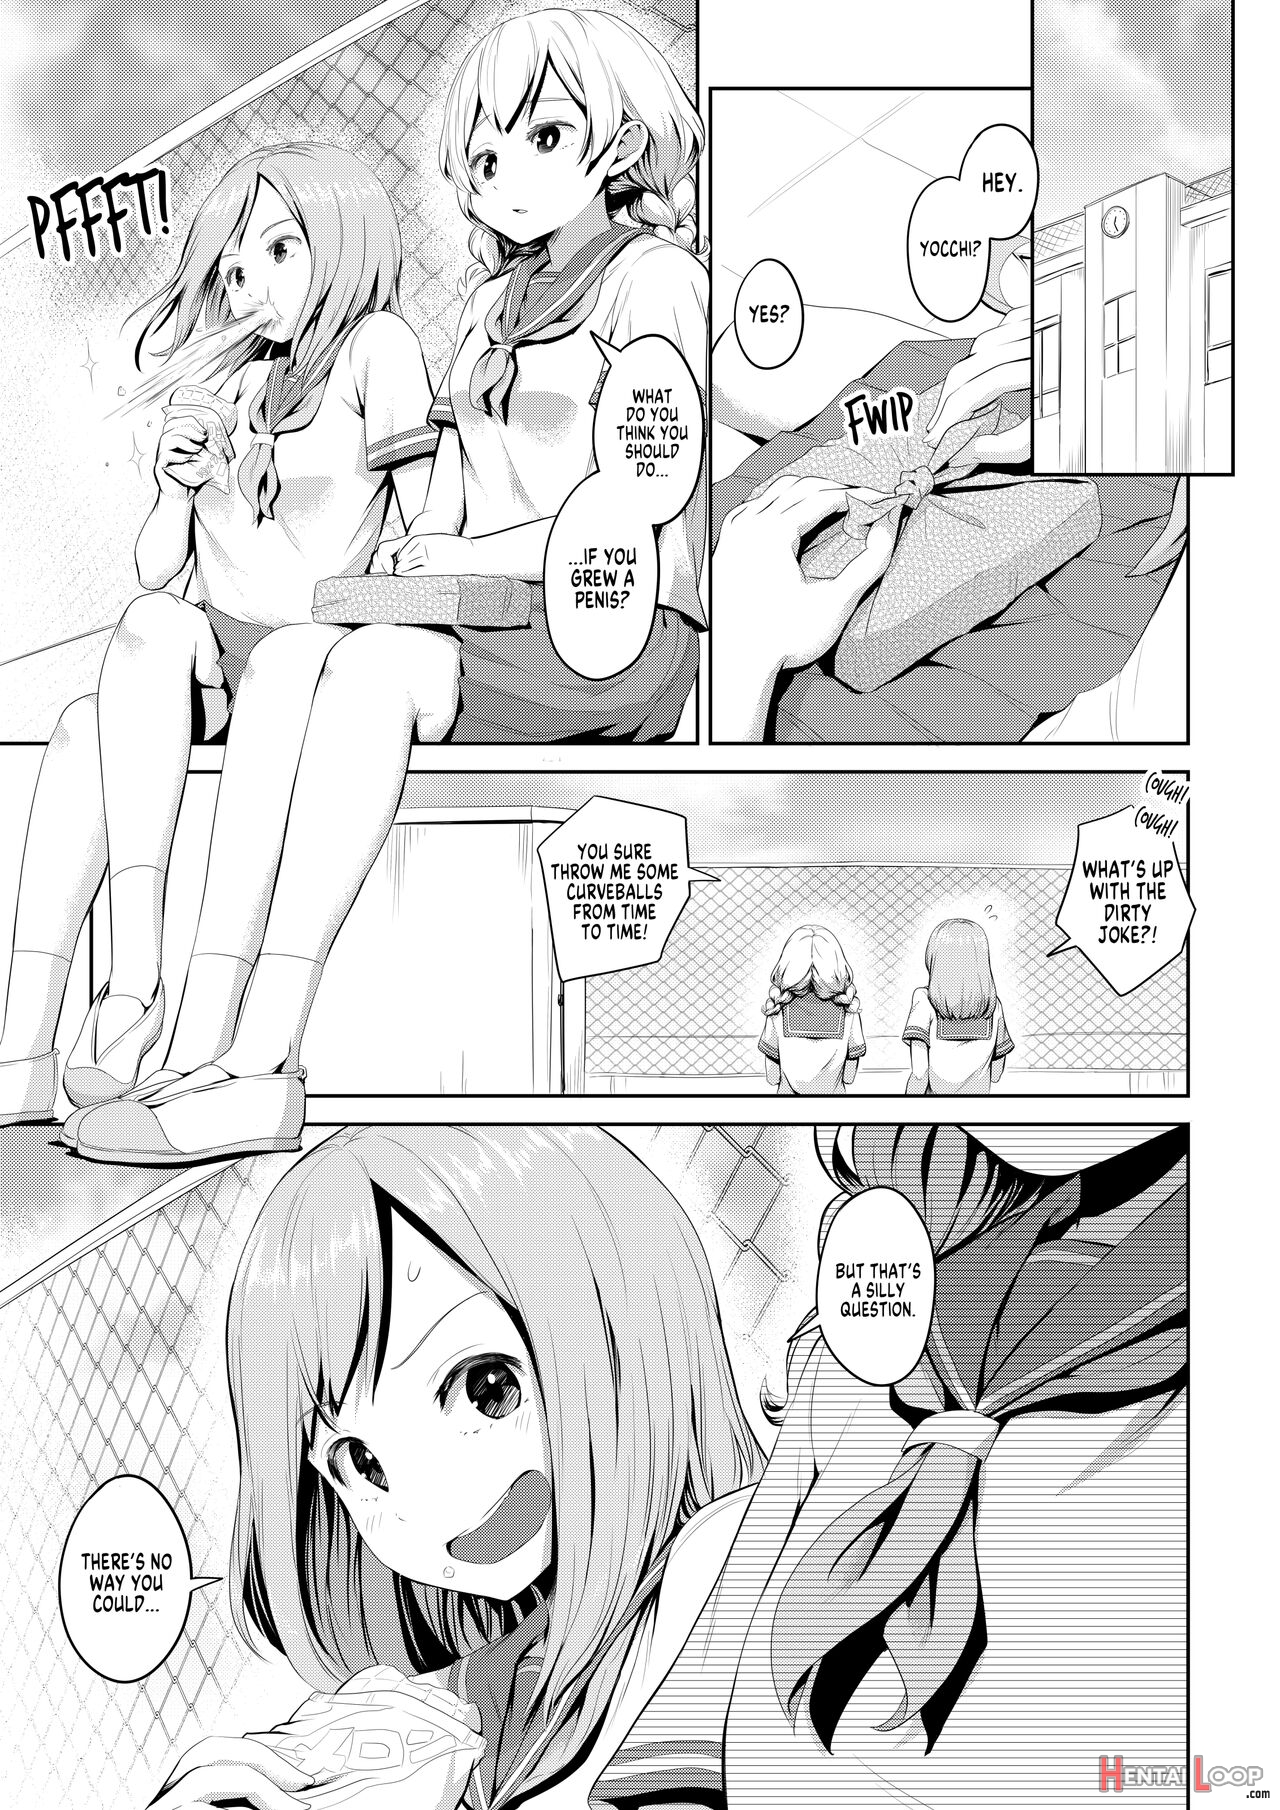 I’ve Grown A Penis, What Should I Do? page 31